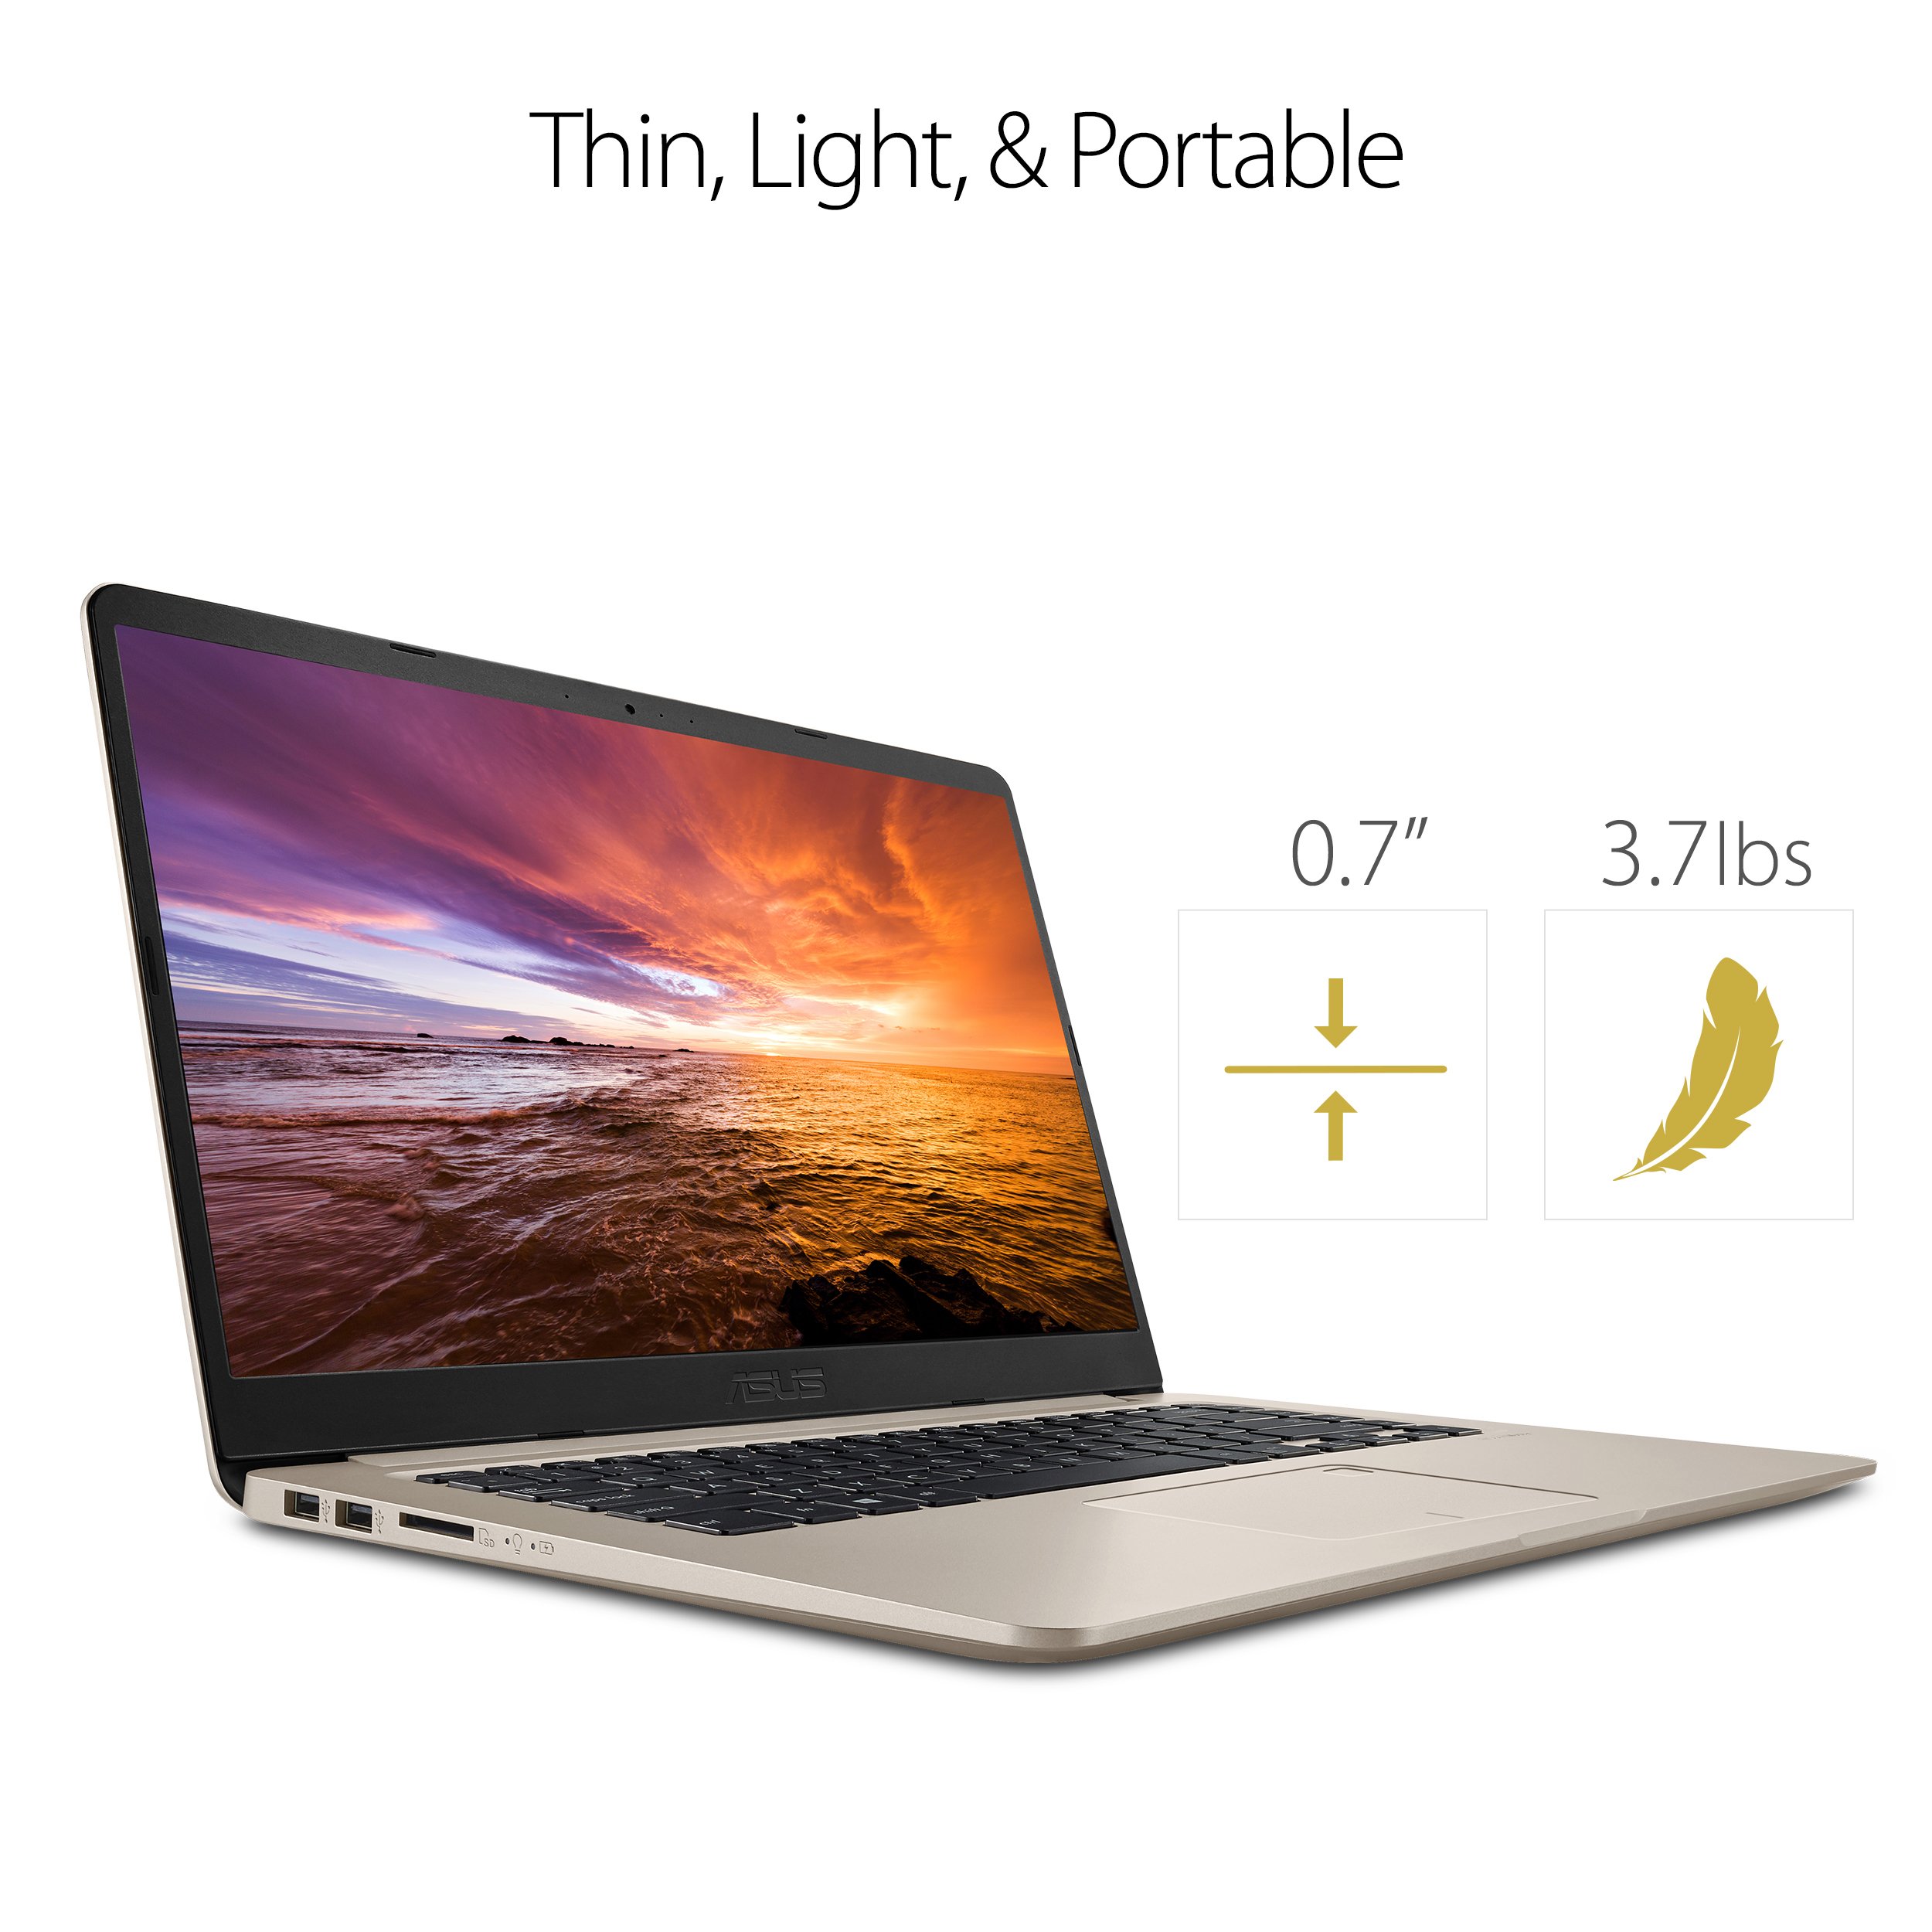 ASUS VivoBook S Ultra Thin and Portable Laptop, Intel Core i5-8250U processor, 8GB DDR4 RAM, 256GB SSD, 15.6” FHD WideView Display, ASUS NanoEdge Bezel, S510UA-DS51